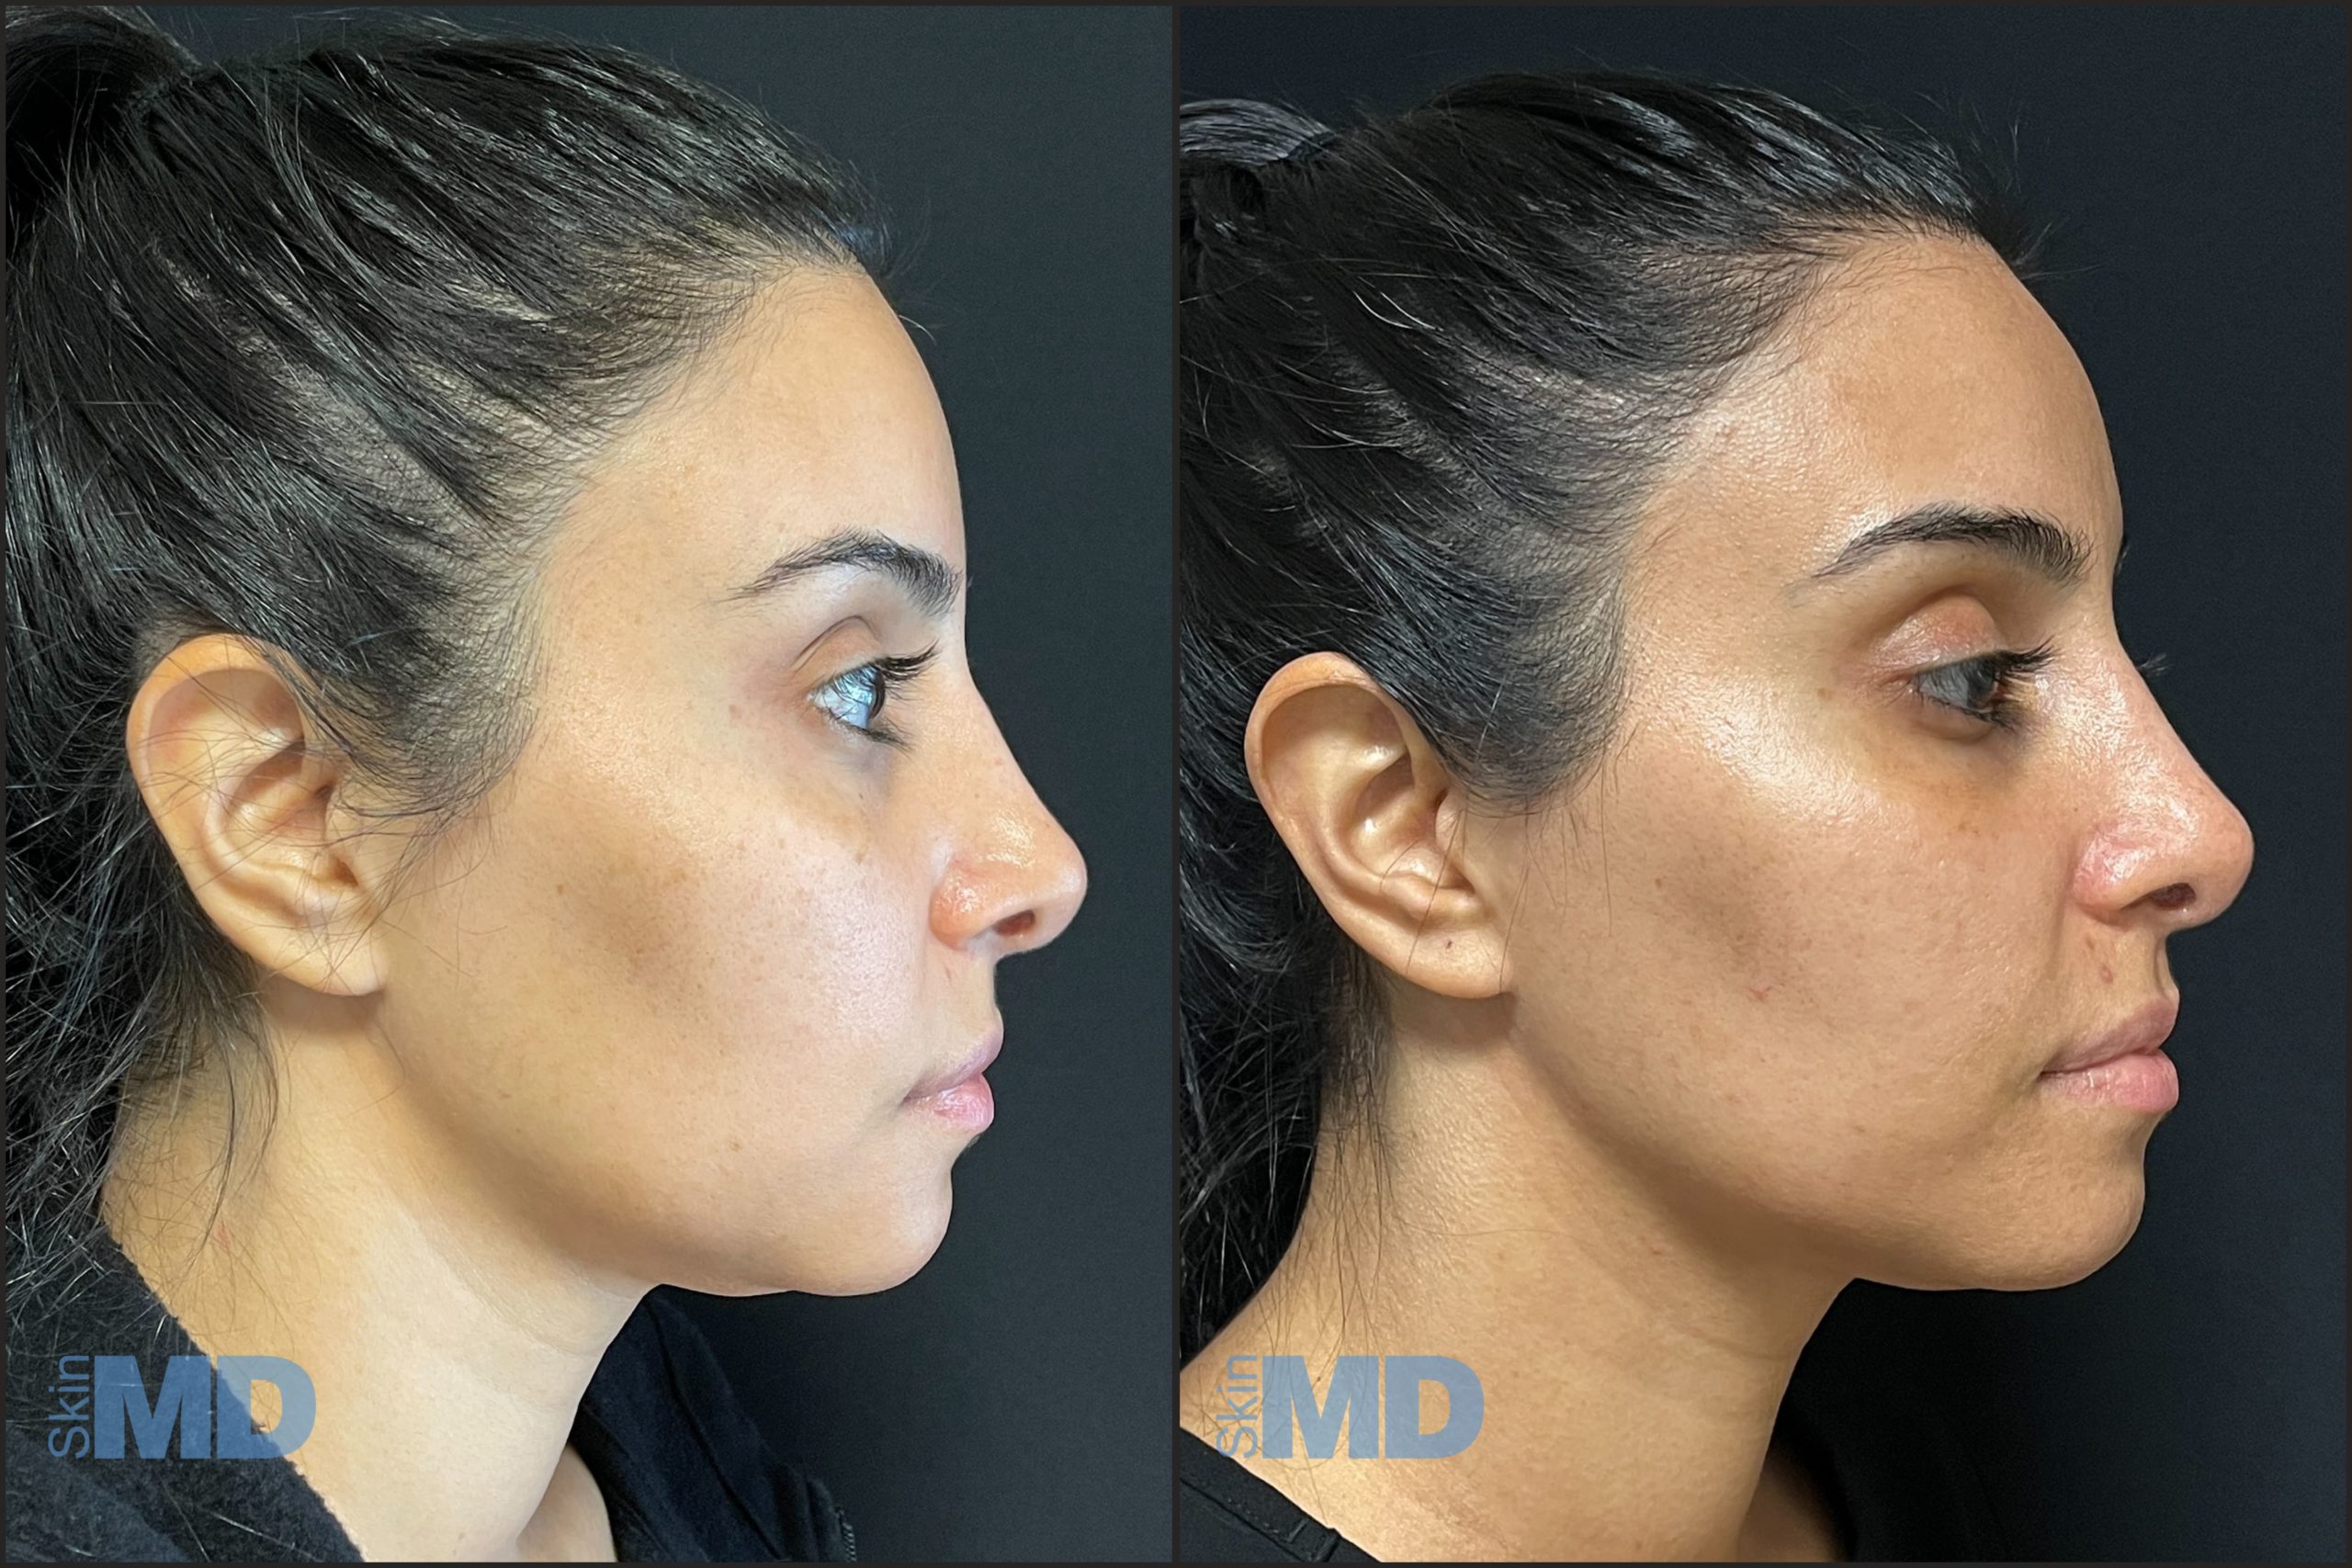 Before and after Morpheus results